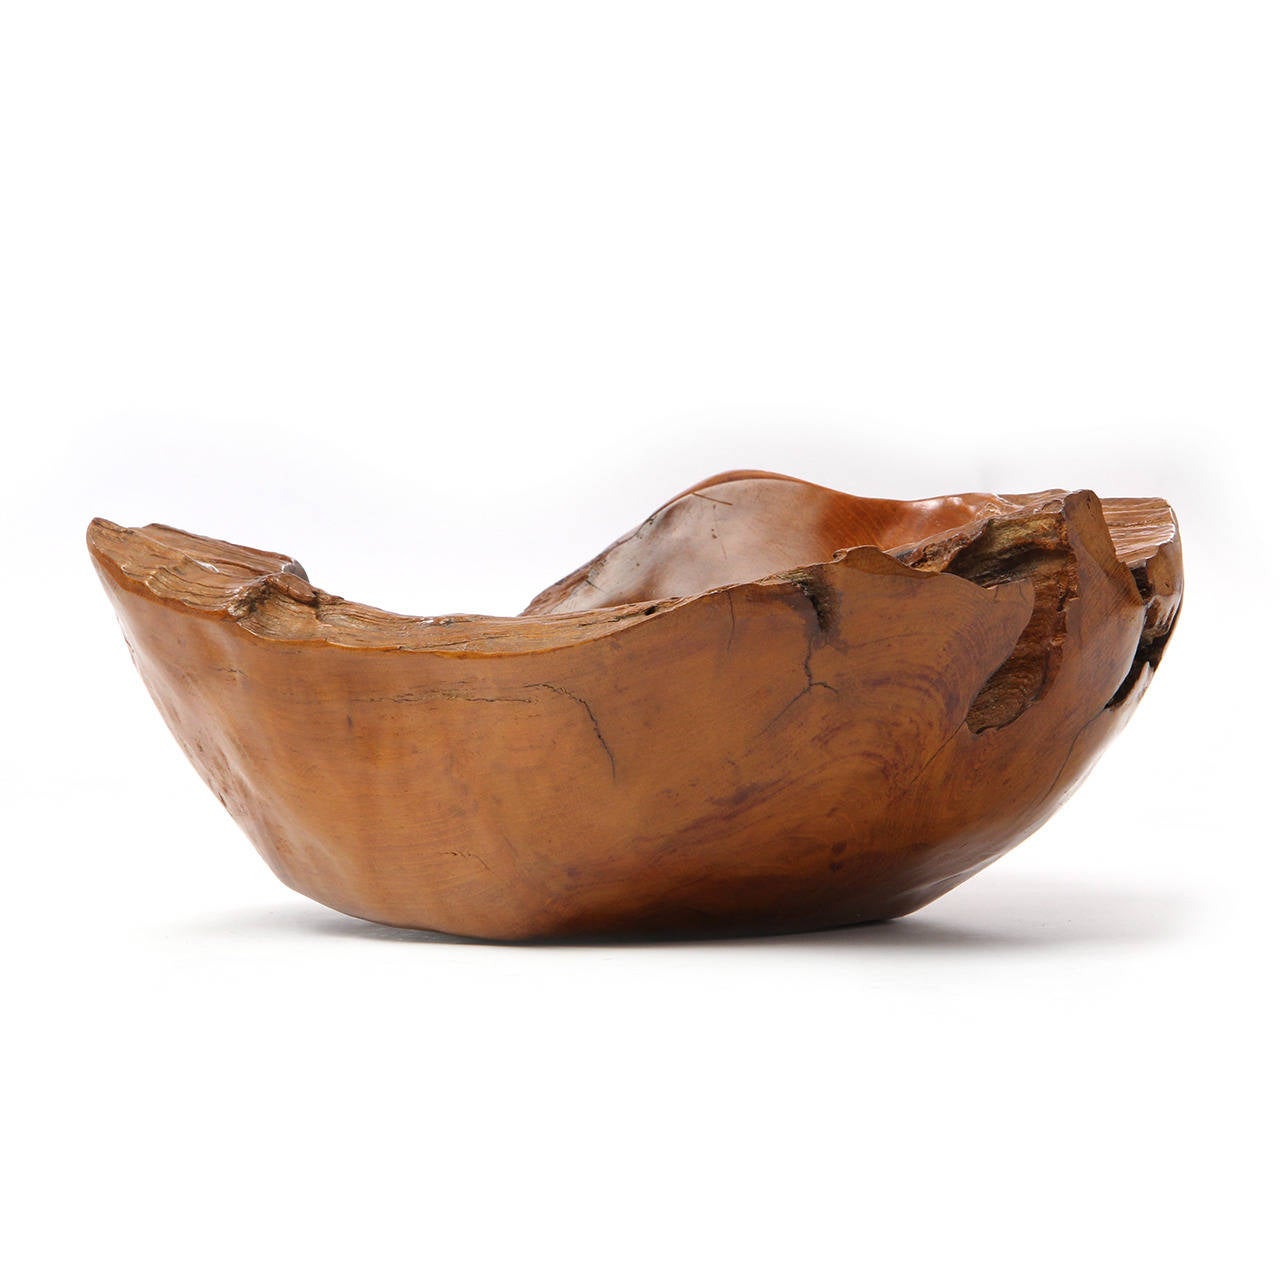 A beautiful and expressive hand-carved bowl of great scale having a warm caramel tone and natural free-edge sides.